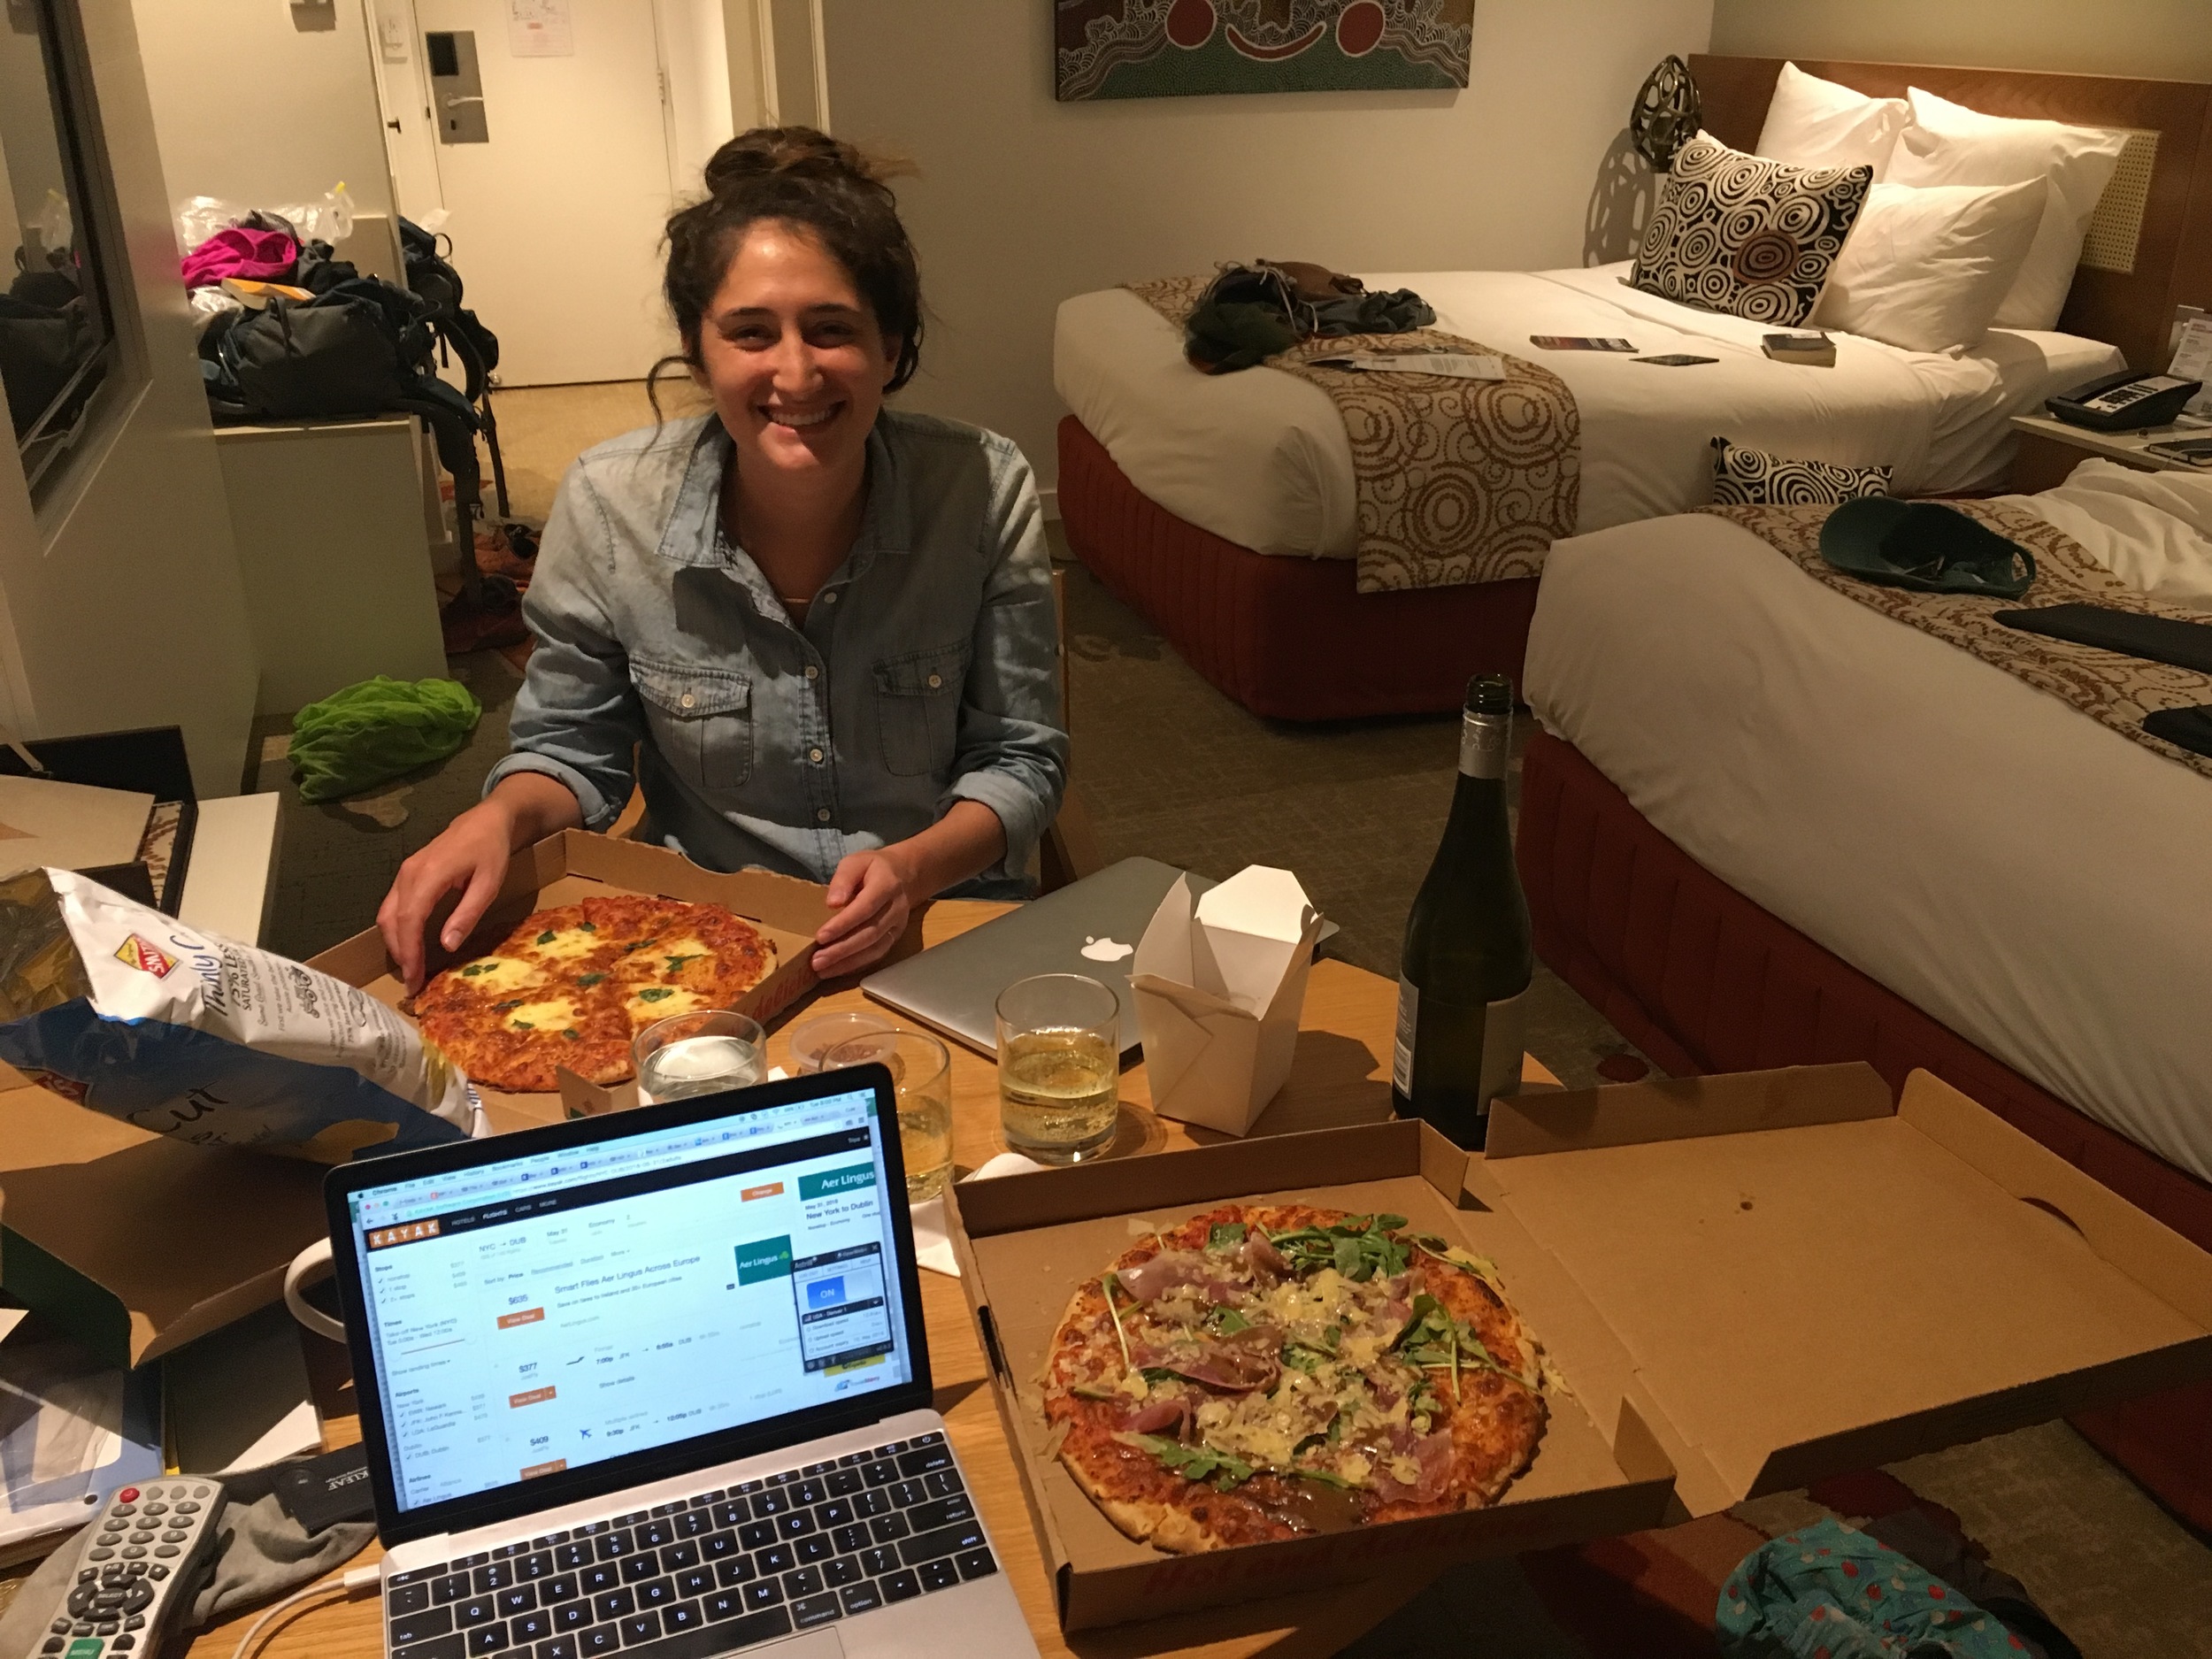 Night of pizza, champagne and trip planning